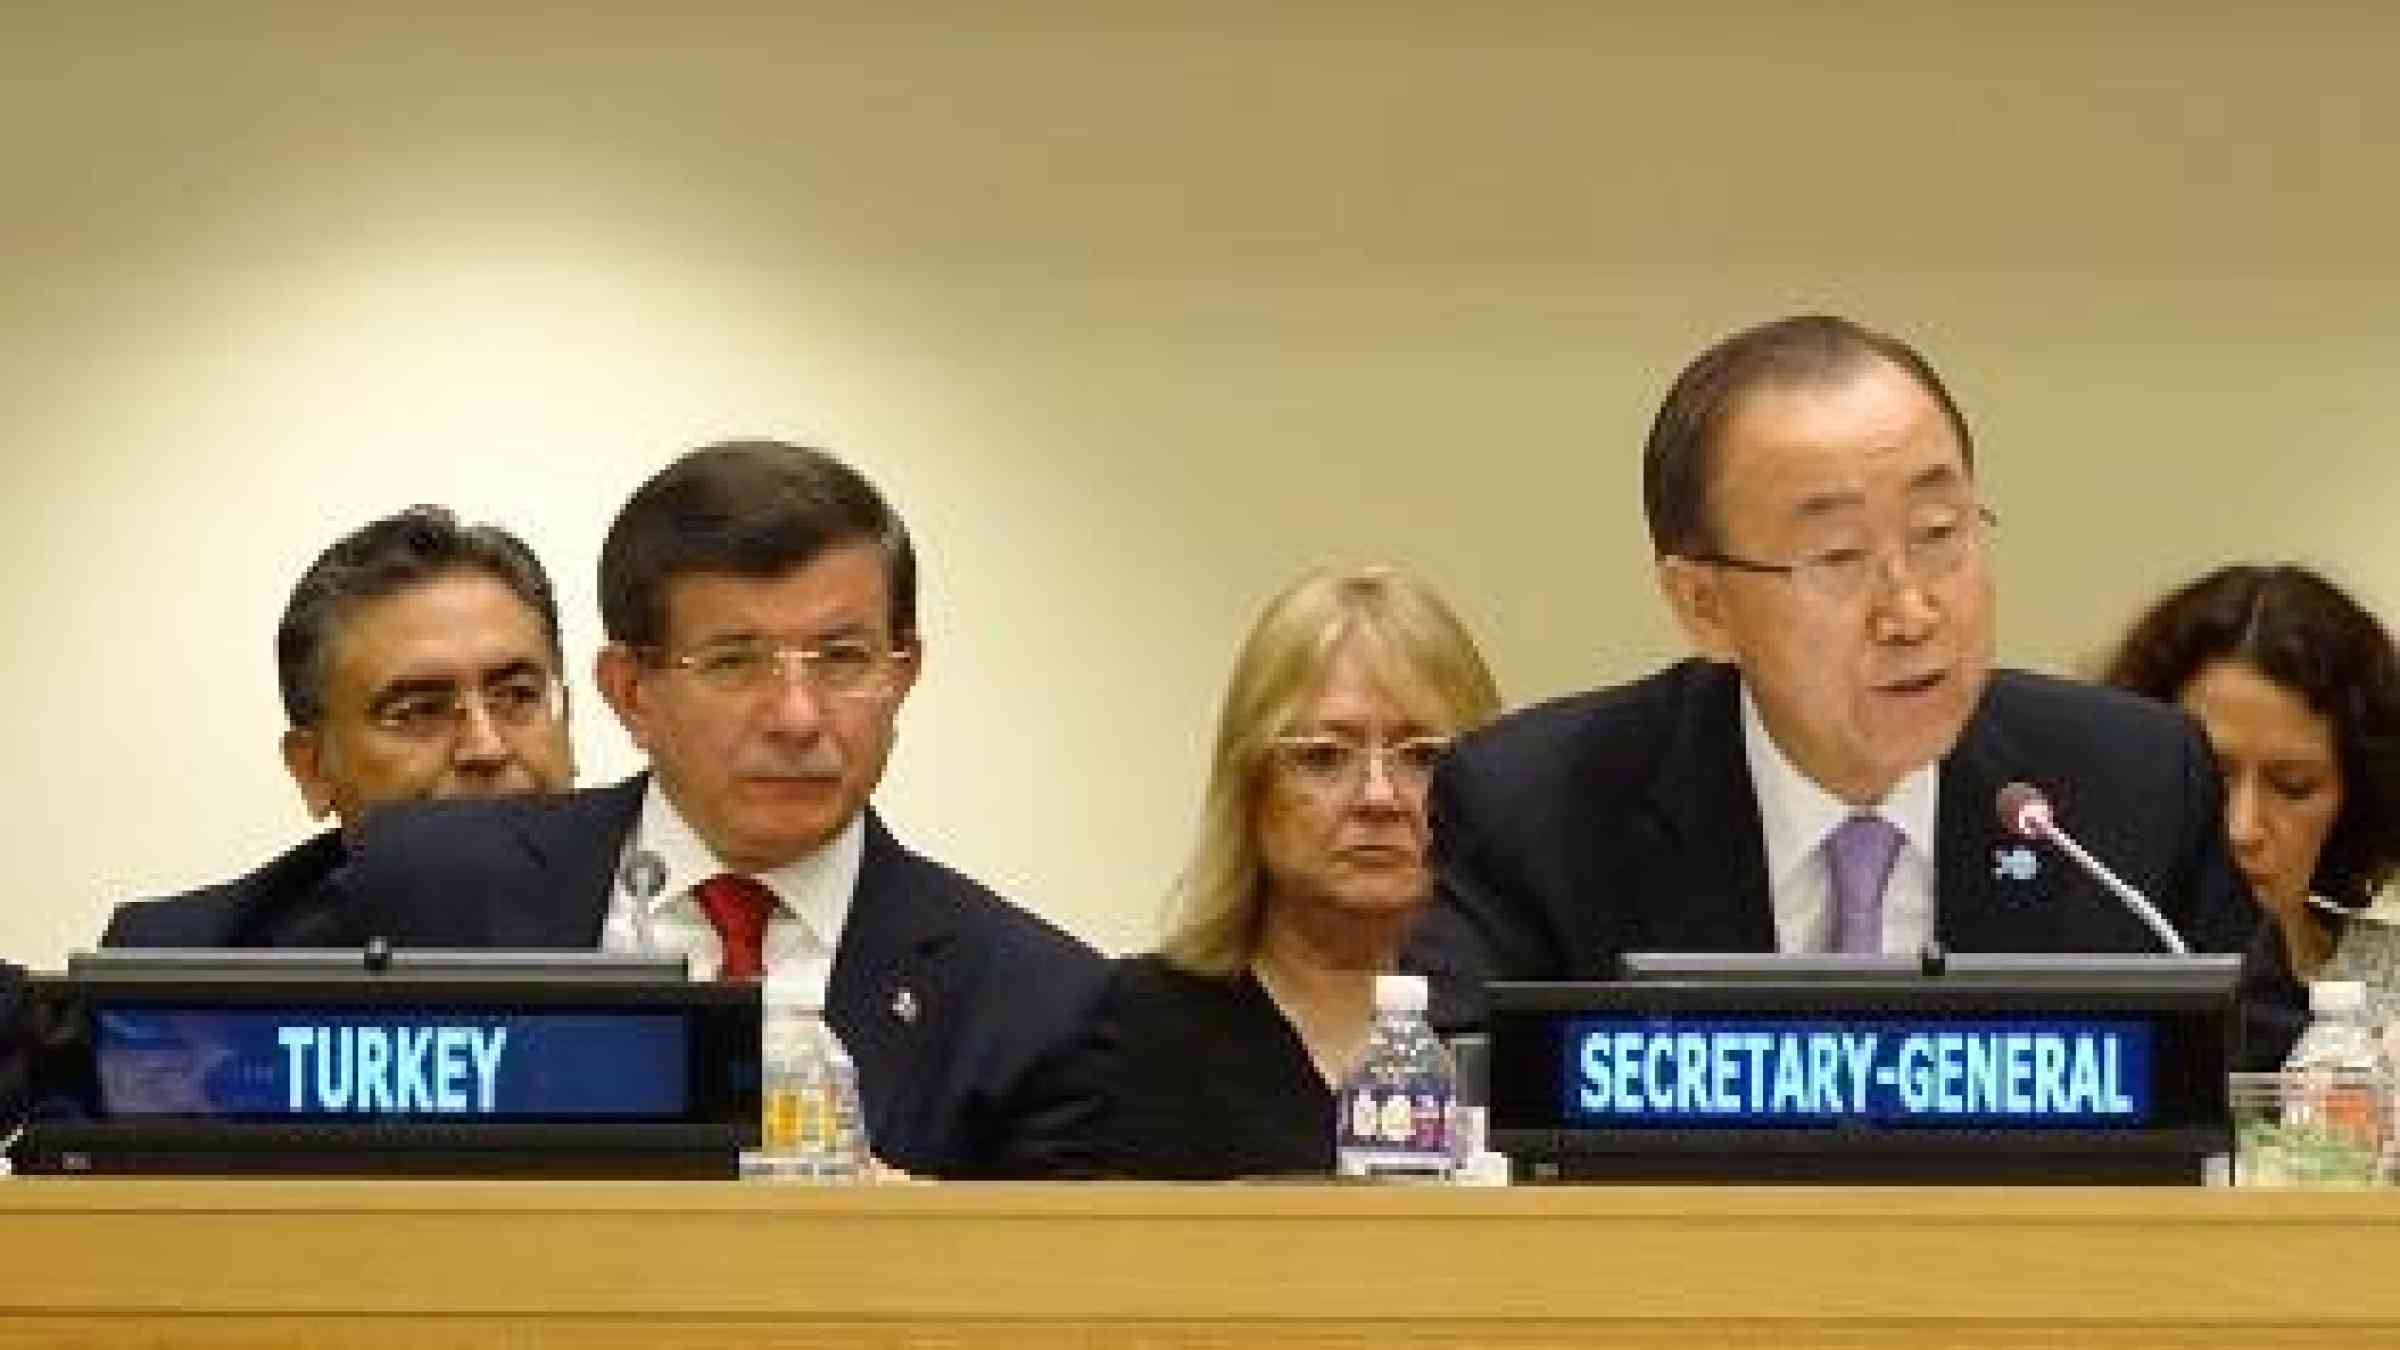 Host Ahmet Davutoglu, Prime Minister of Turkey, listens as UN Secretary-General Ban Ki-moon addresses the audience at the special event held during the UN General Assembly (Photo: UNISDR)